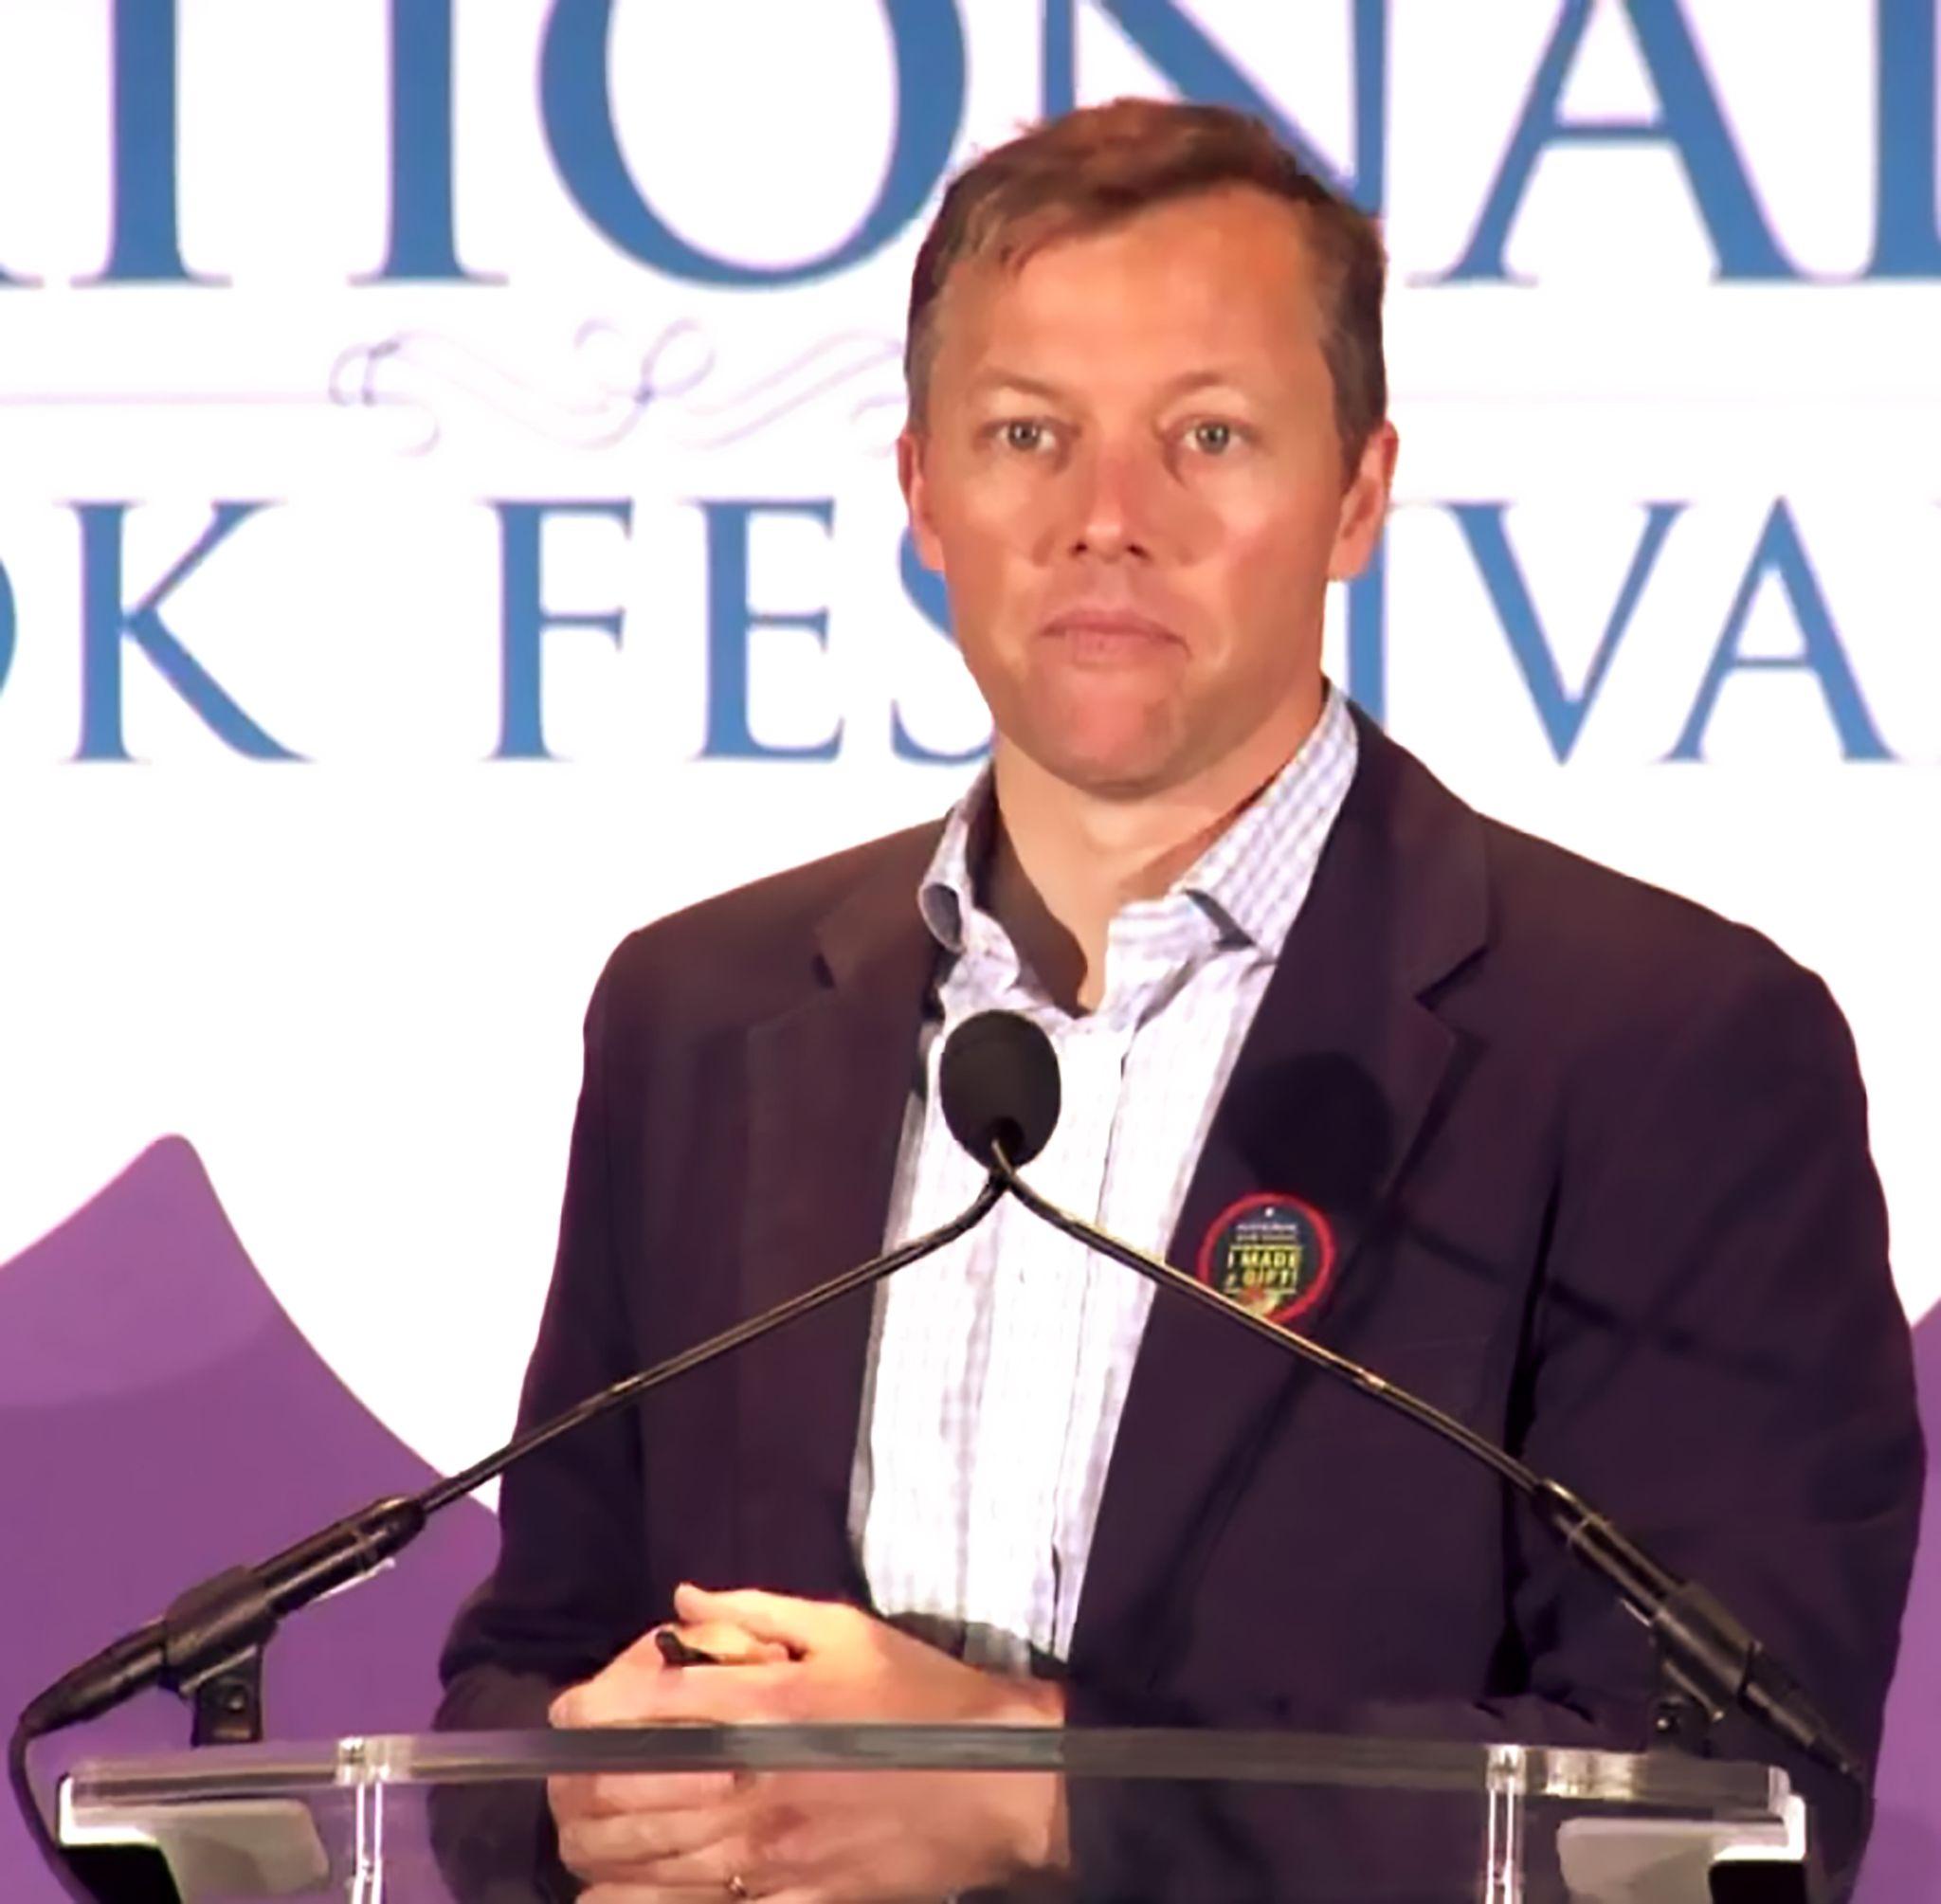 Photo of Matthew Desmond in front of a lectern with two microphones.